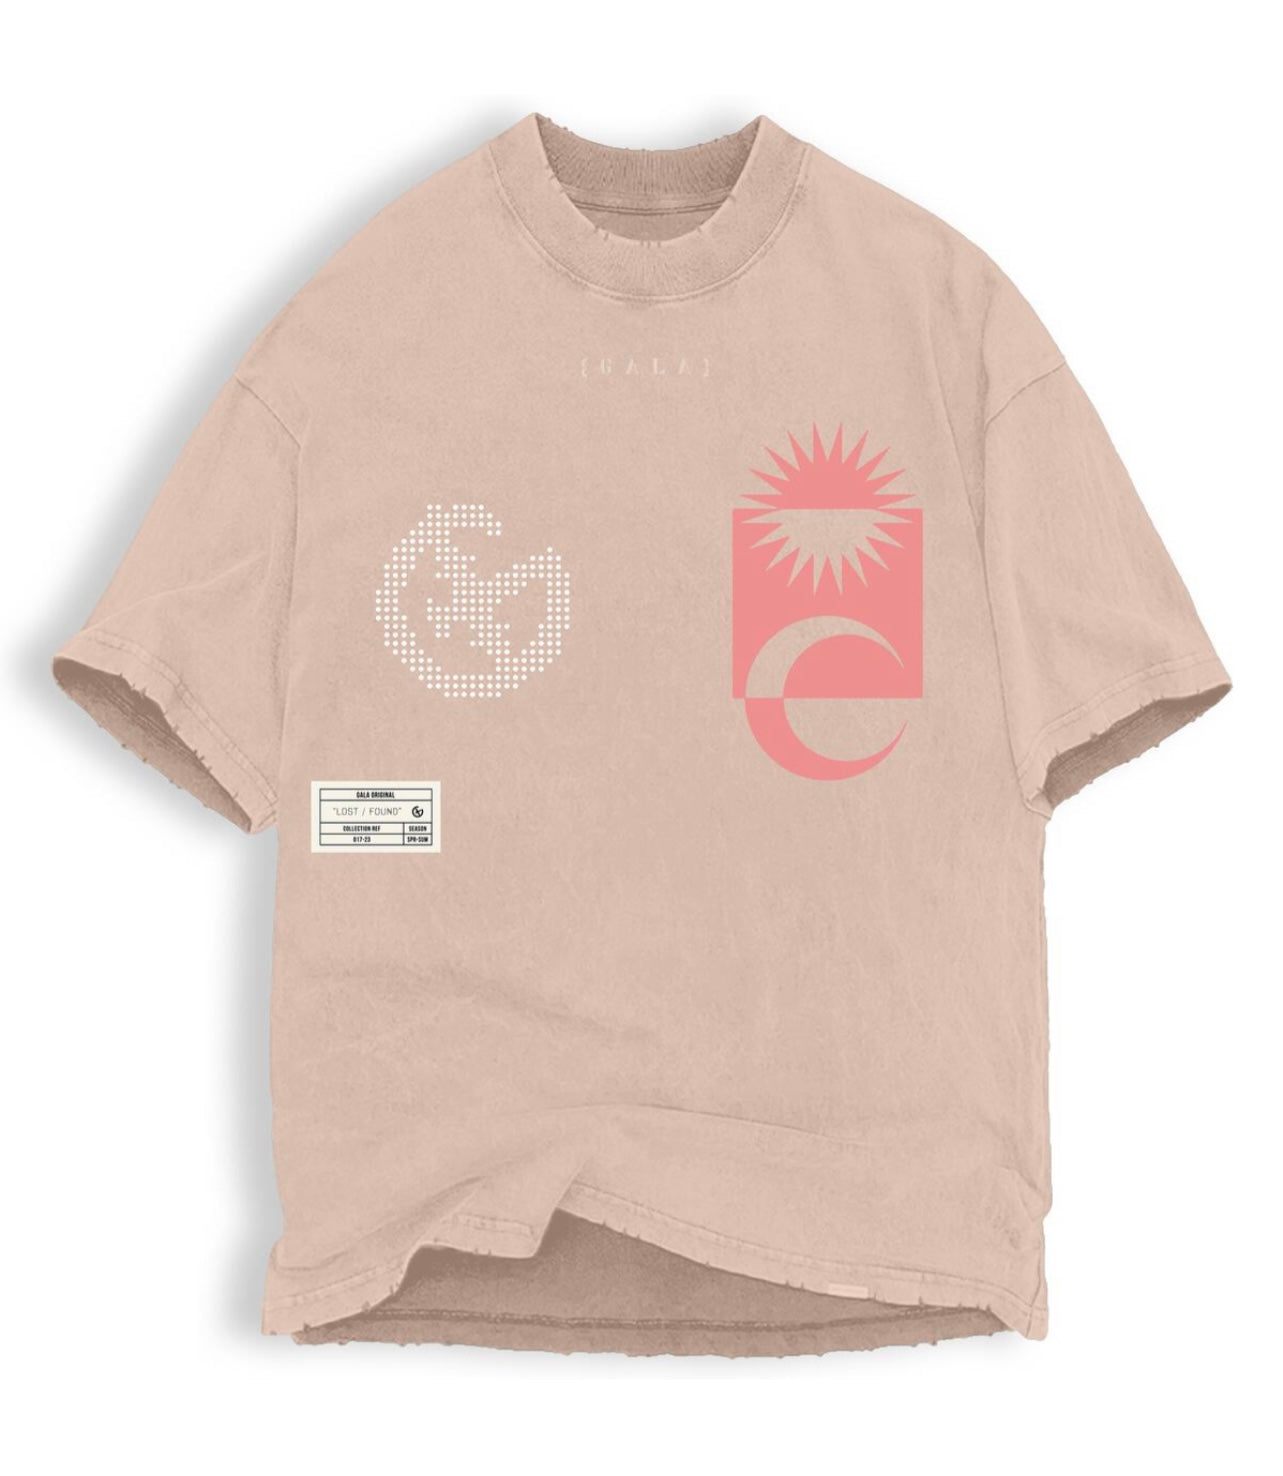 GALA -  OBSCURE TEE - PINK